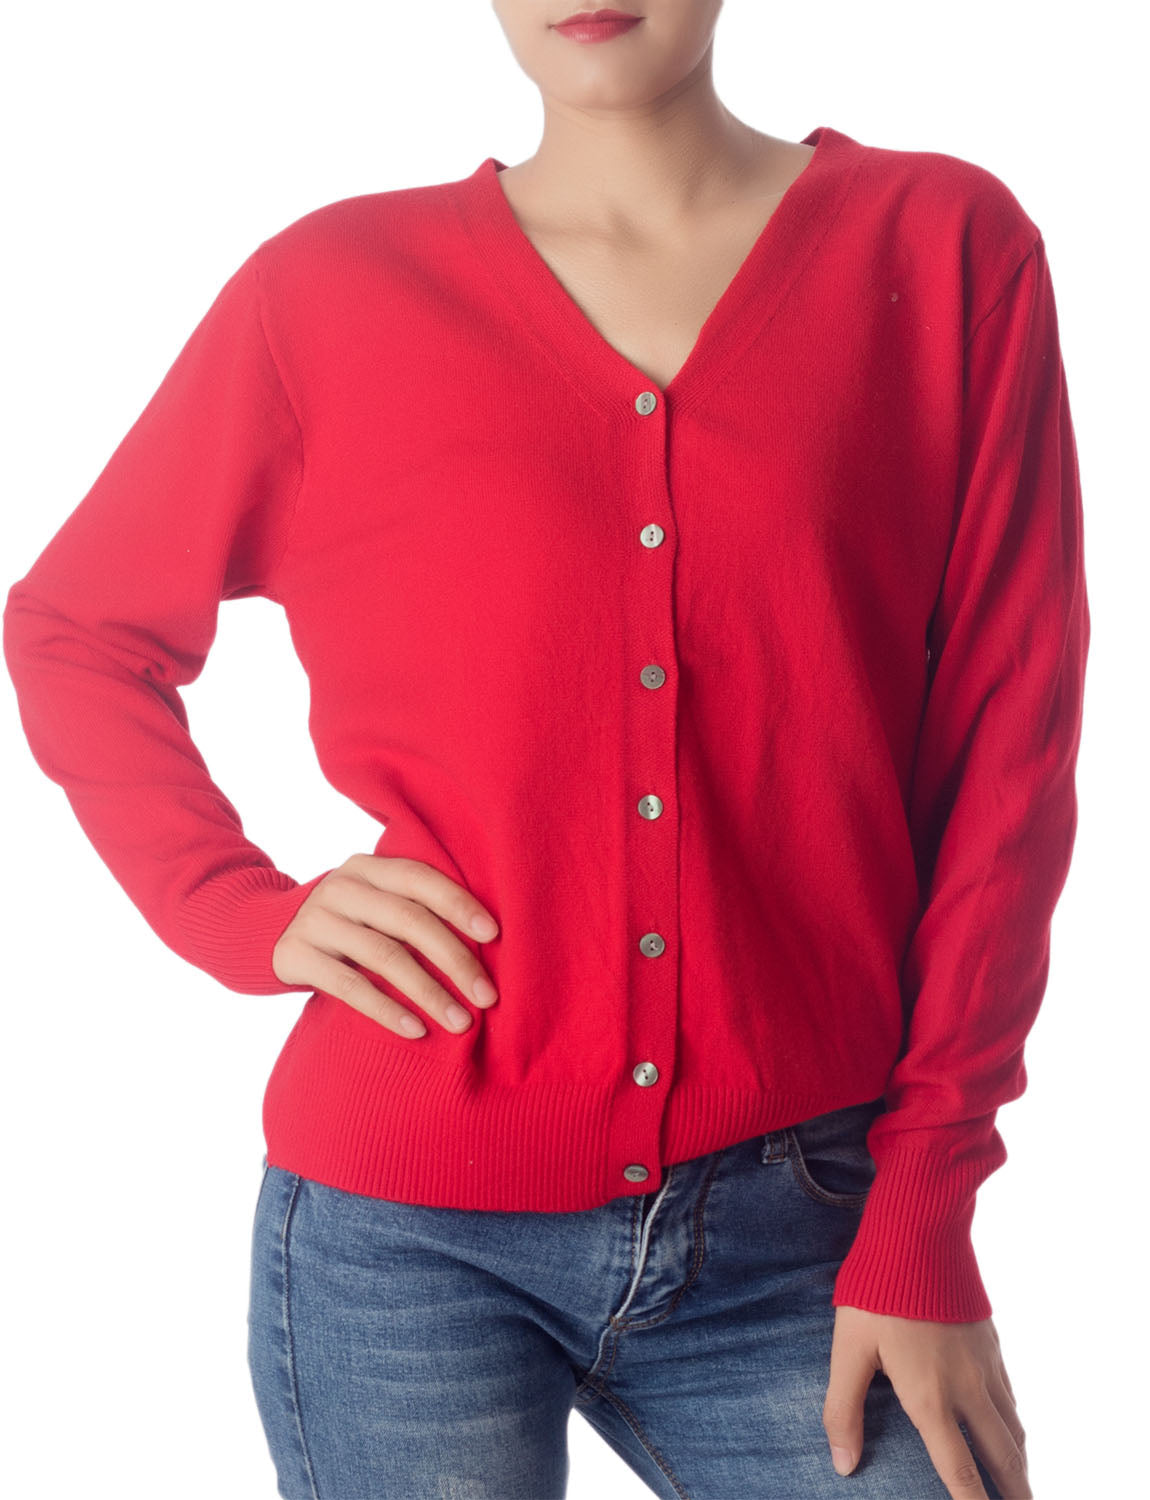 Women's Fashion Button Up Open Front Sweater Ladys Lightweight Cardigan